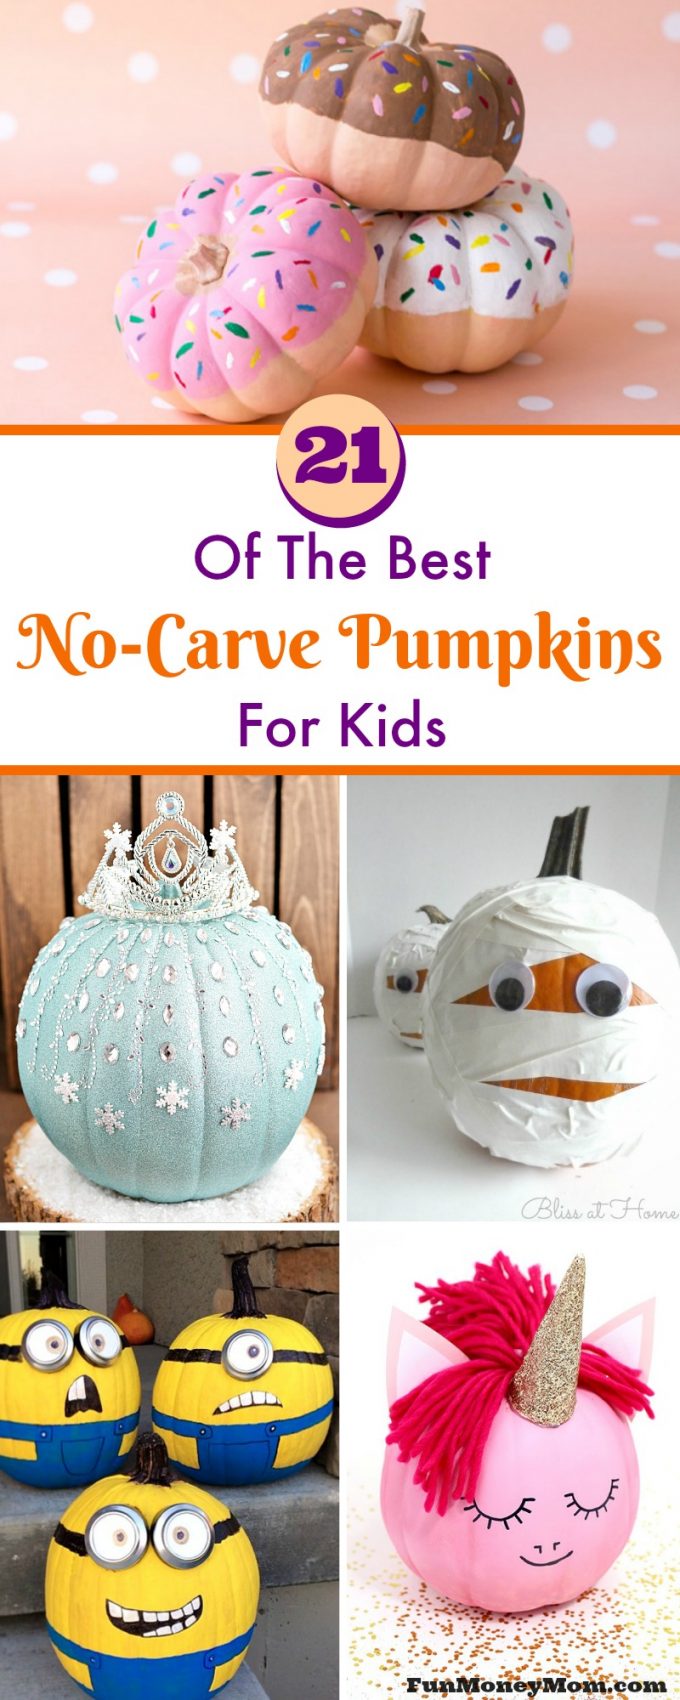 21 Of The Best No Carve Pumpkins For Kids - Fun Money Mom